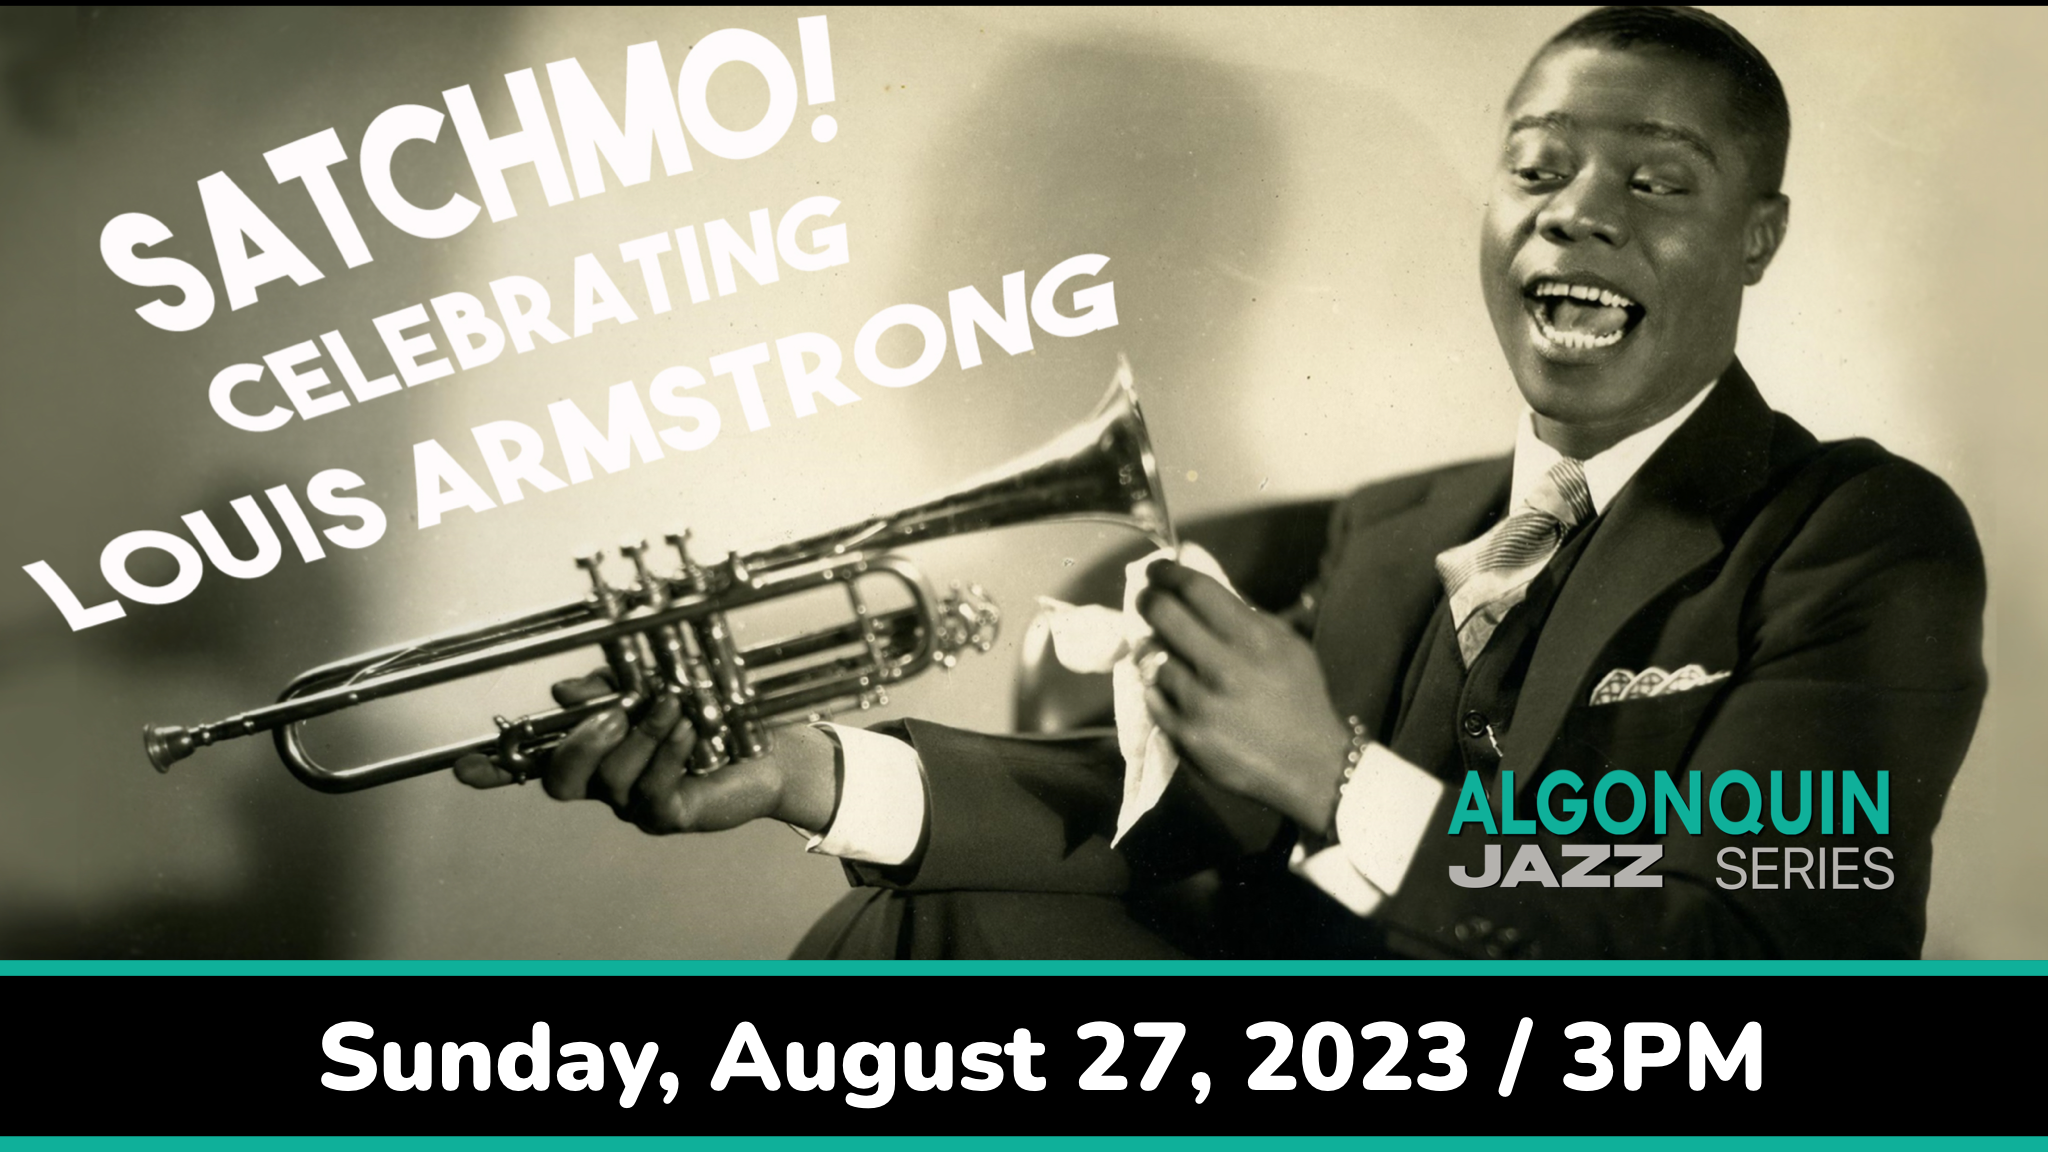 Satchmo! Celebrating Louis Armstrong 

